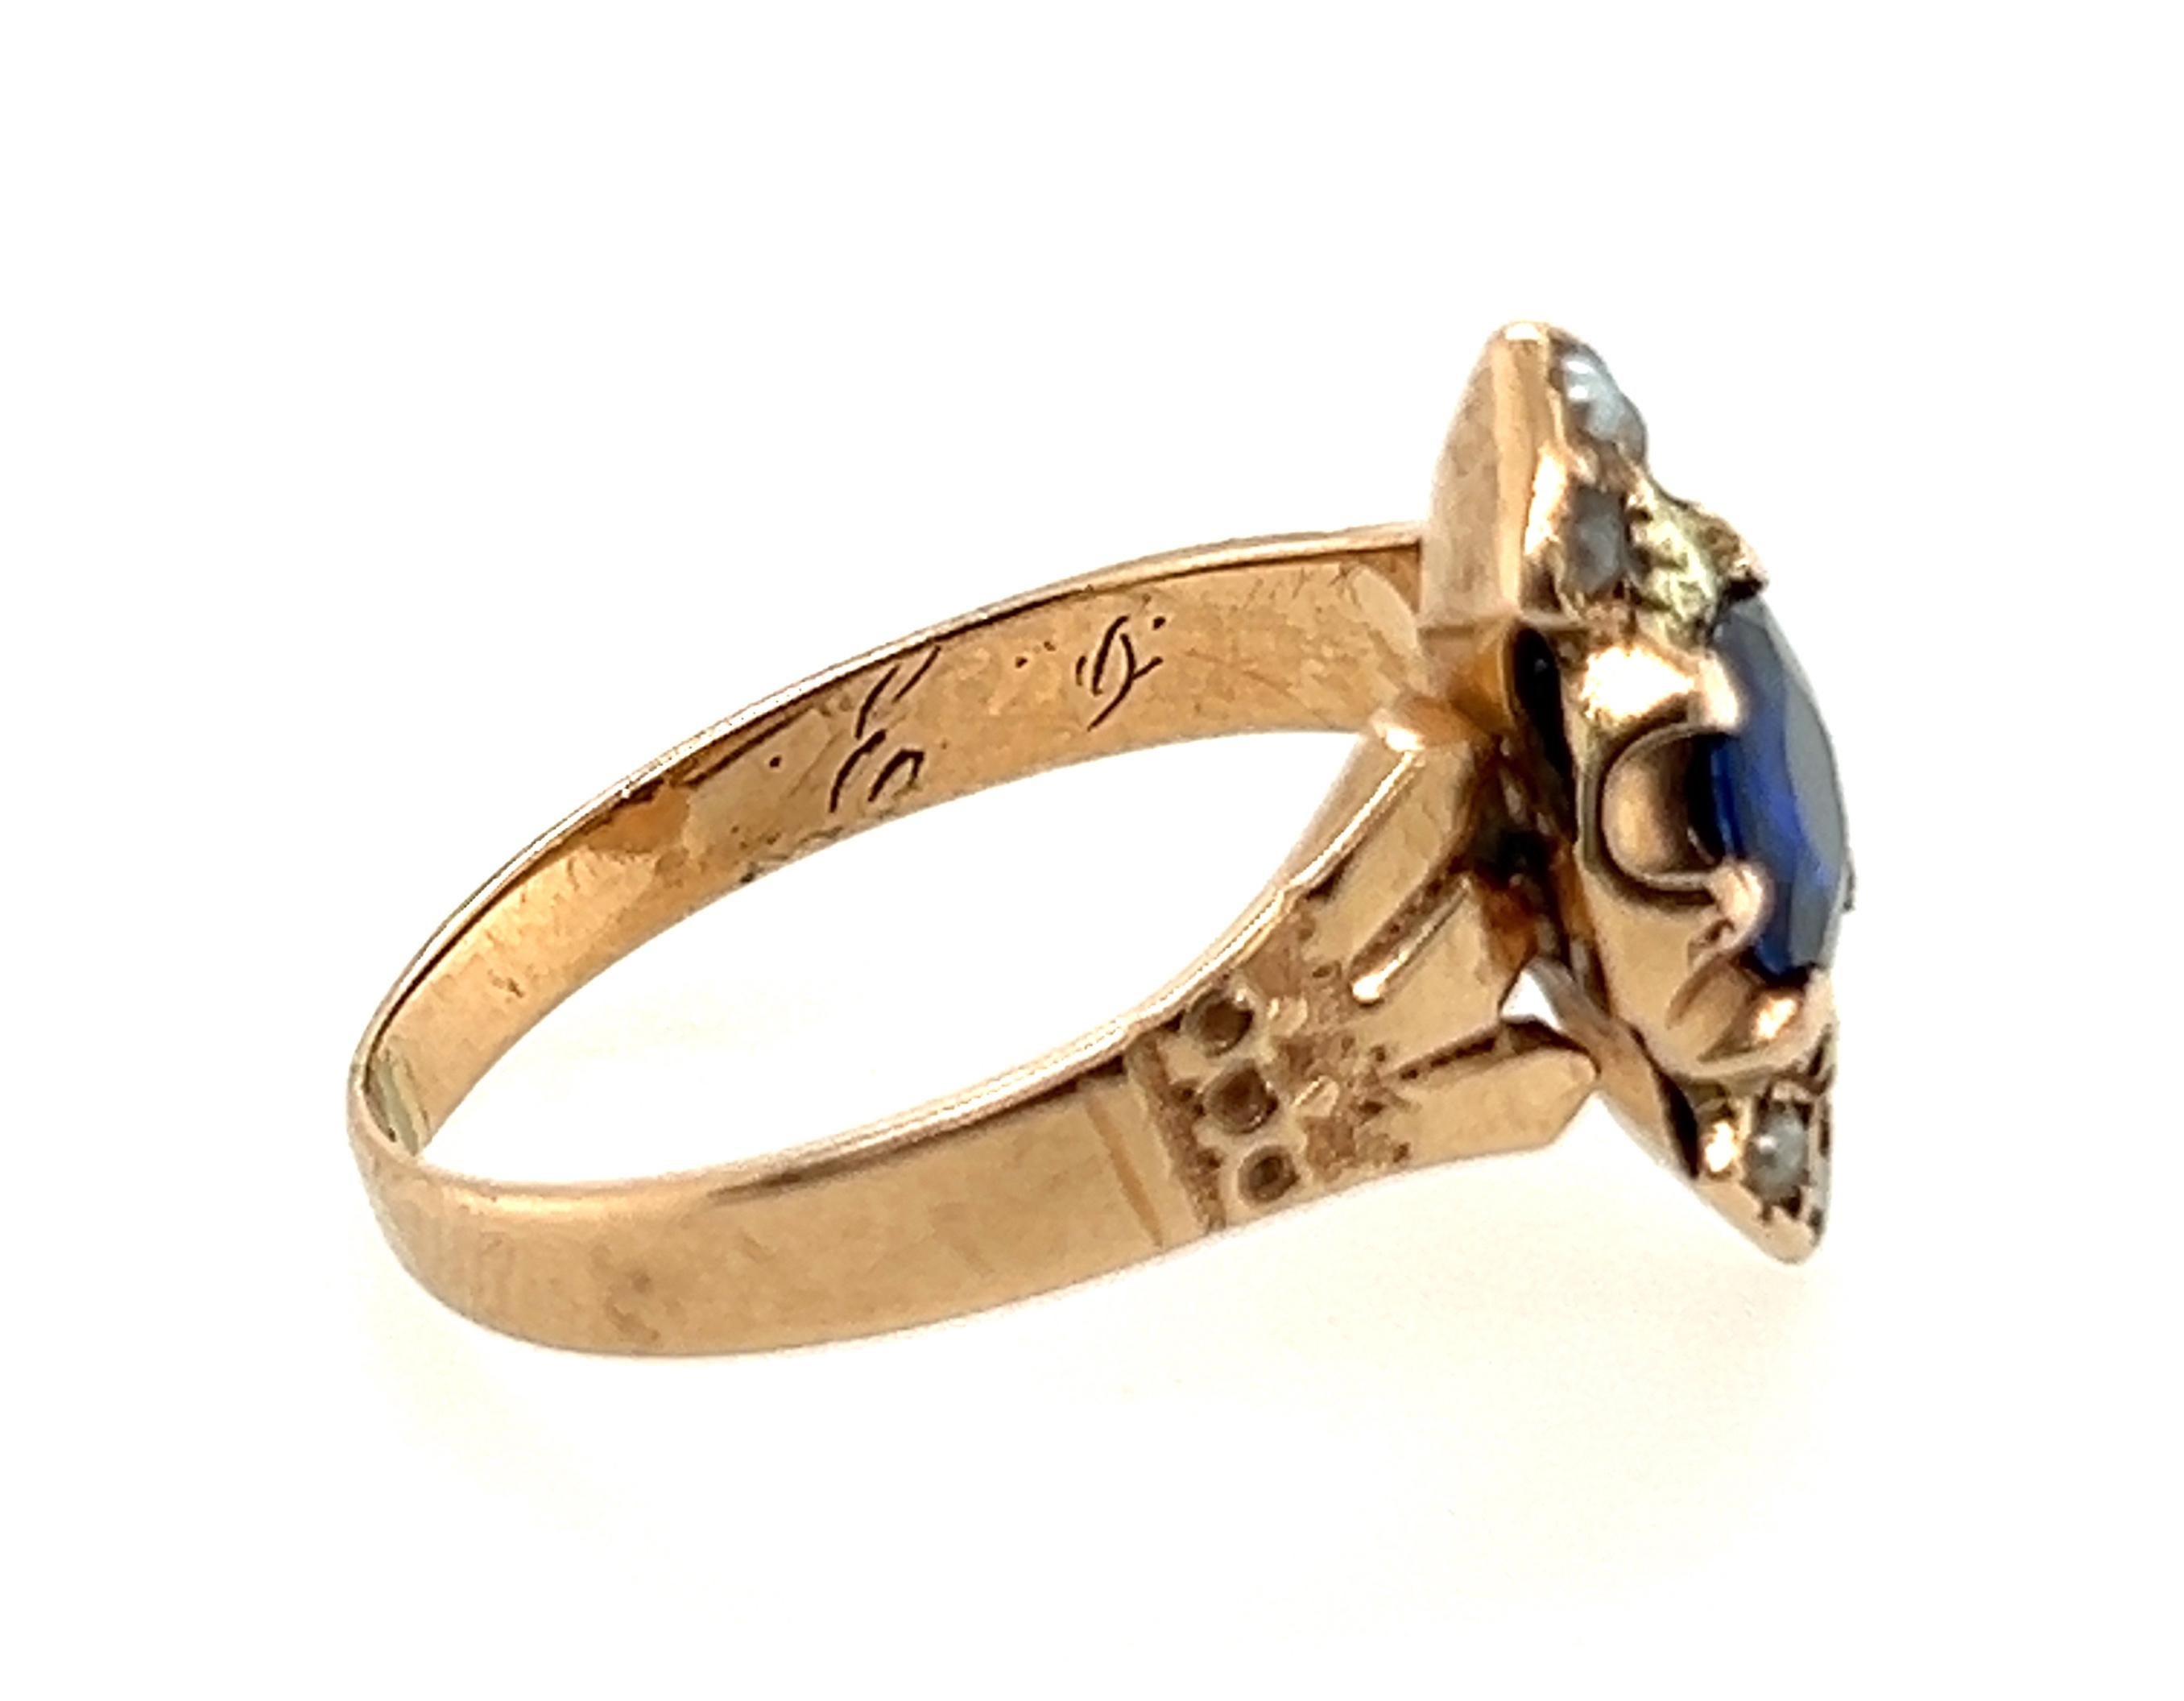 Women's Victorian Sapphire Ring .70ct Seed Pearls Original 1860's-1880's Antique 14K